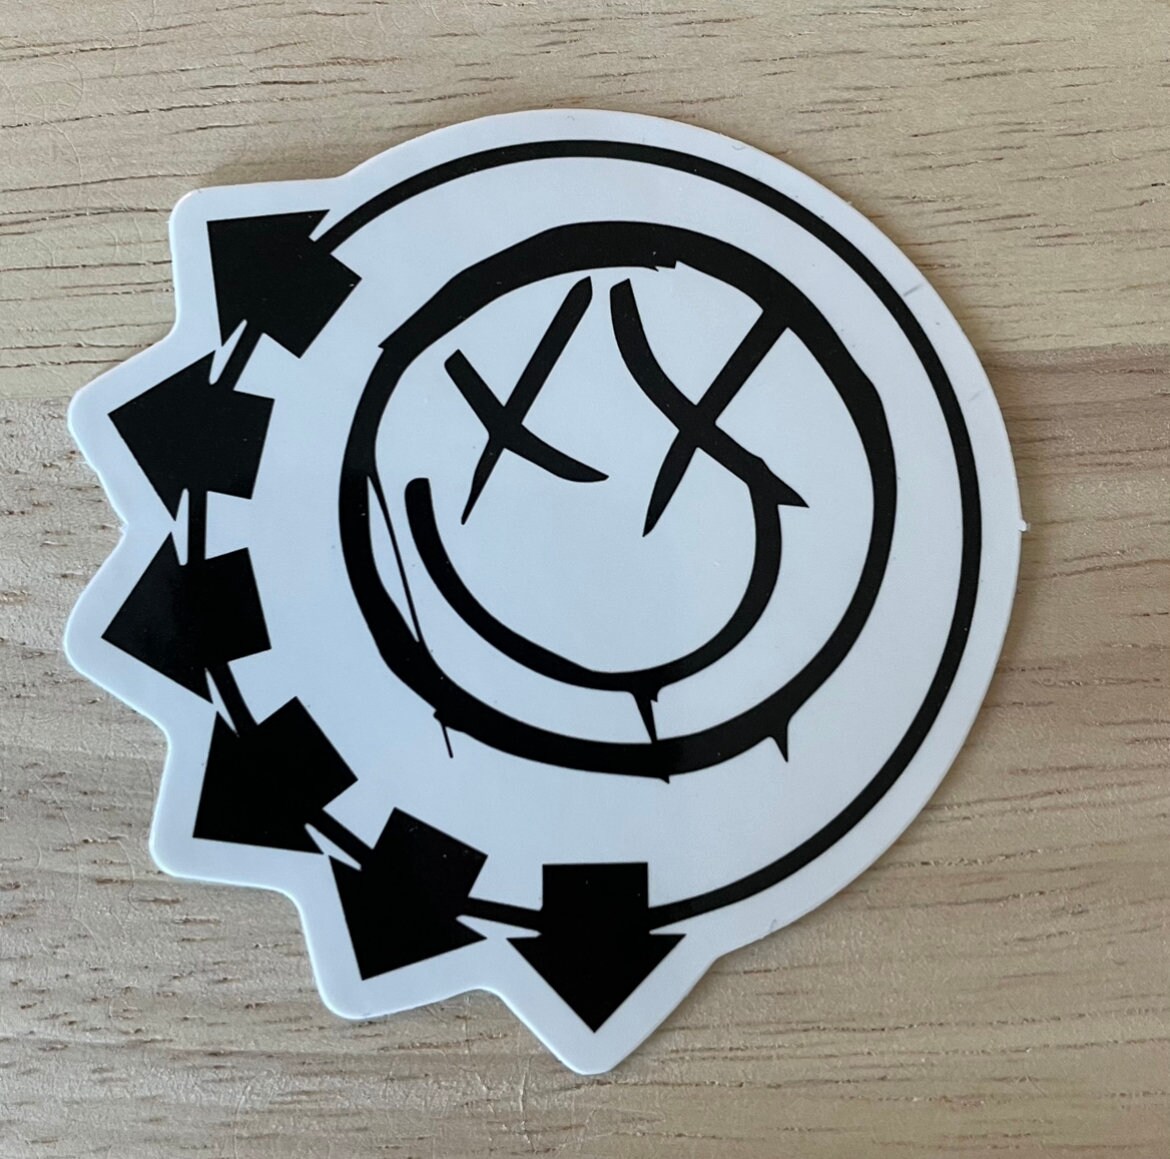 Buy Blink 182 Decal Online In India - Etsy India